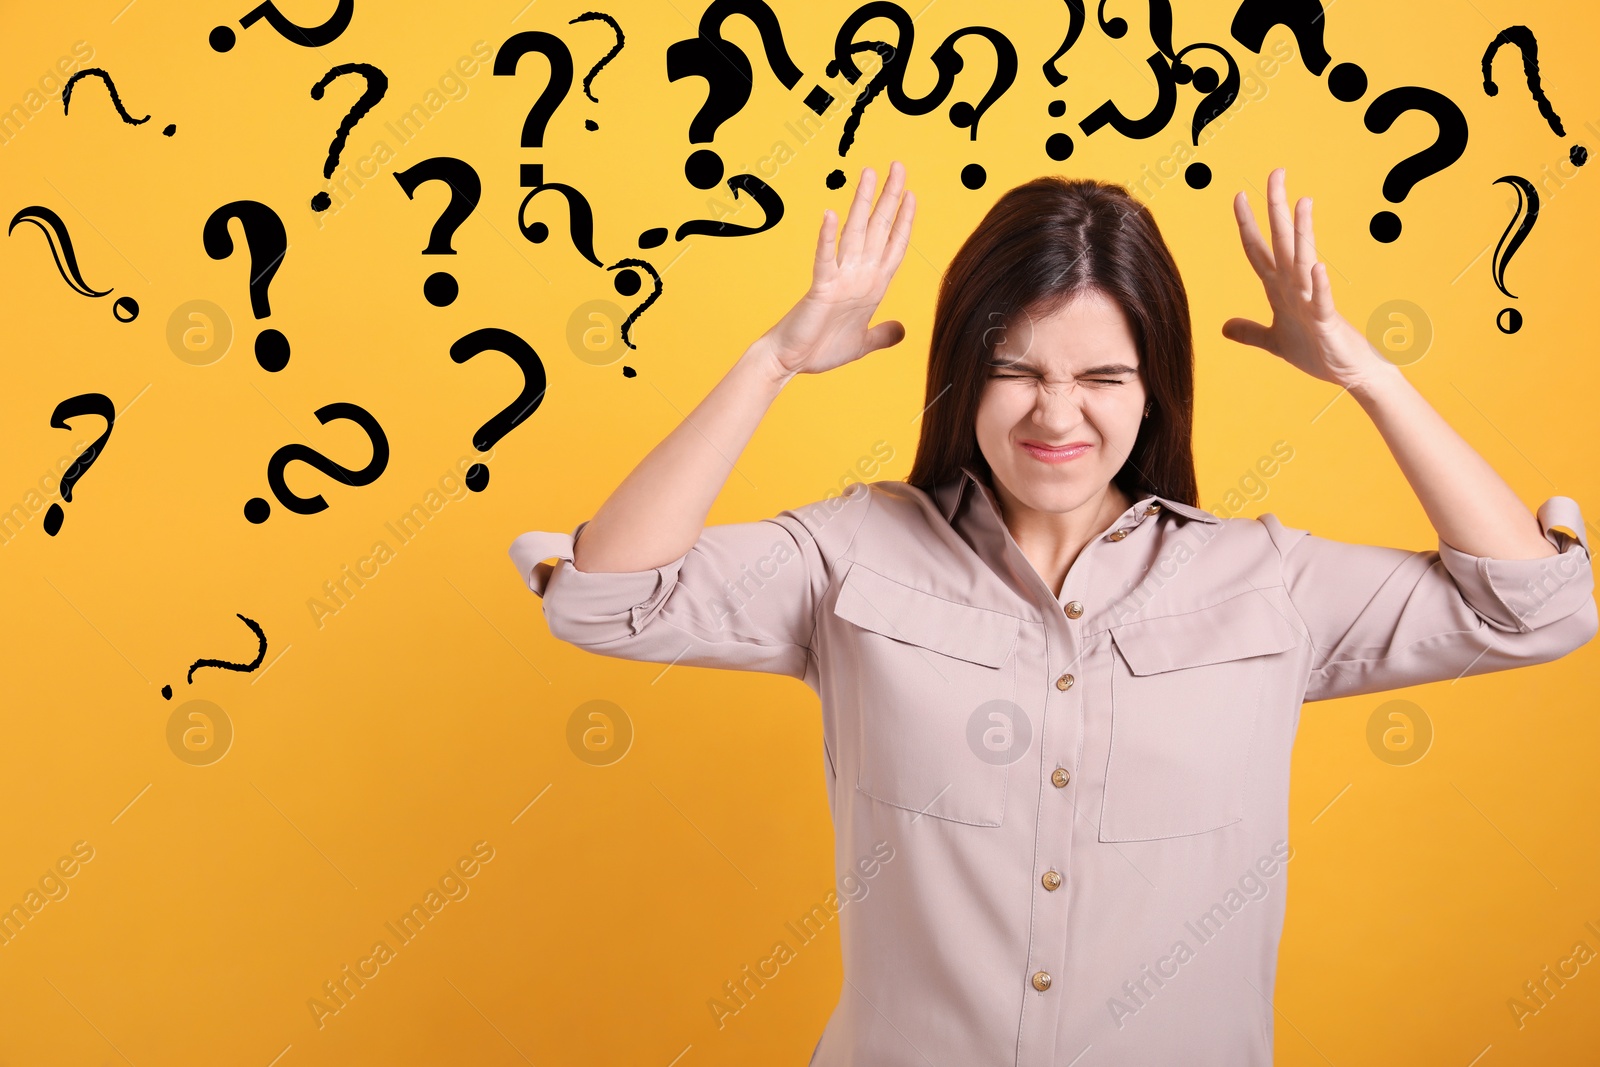 Image of Amnesia. Confused young woman and question marks on yellow background